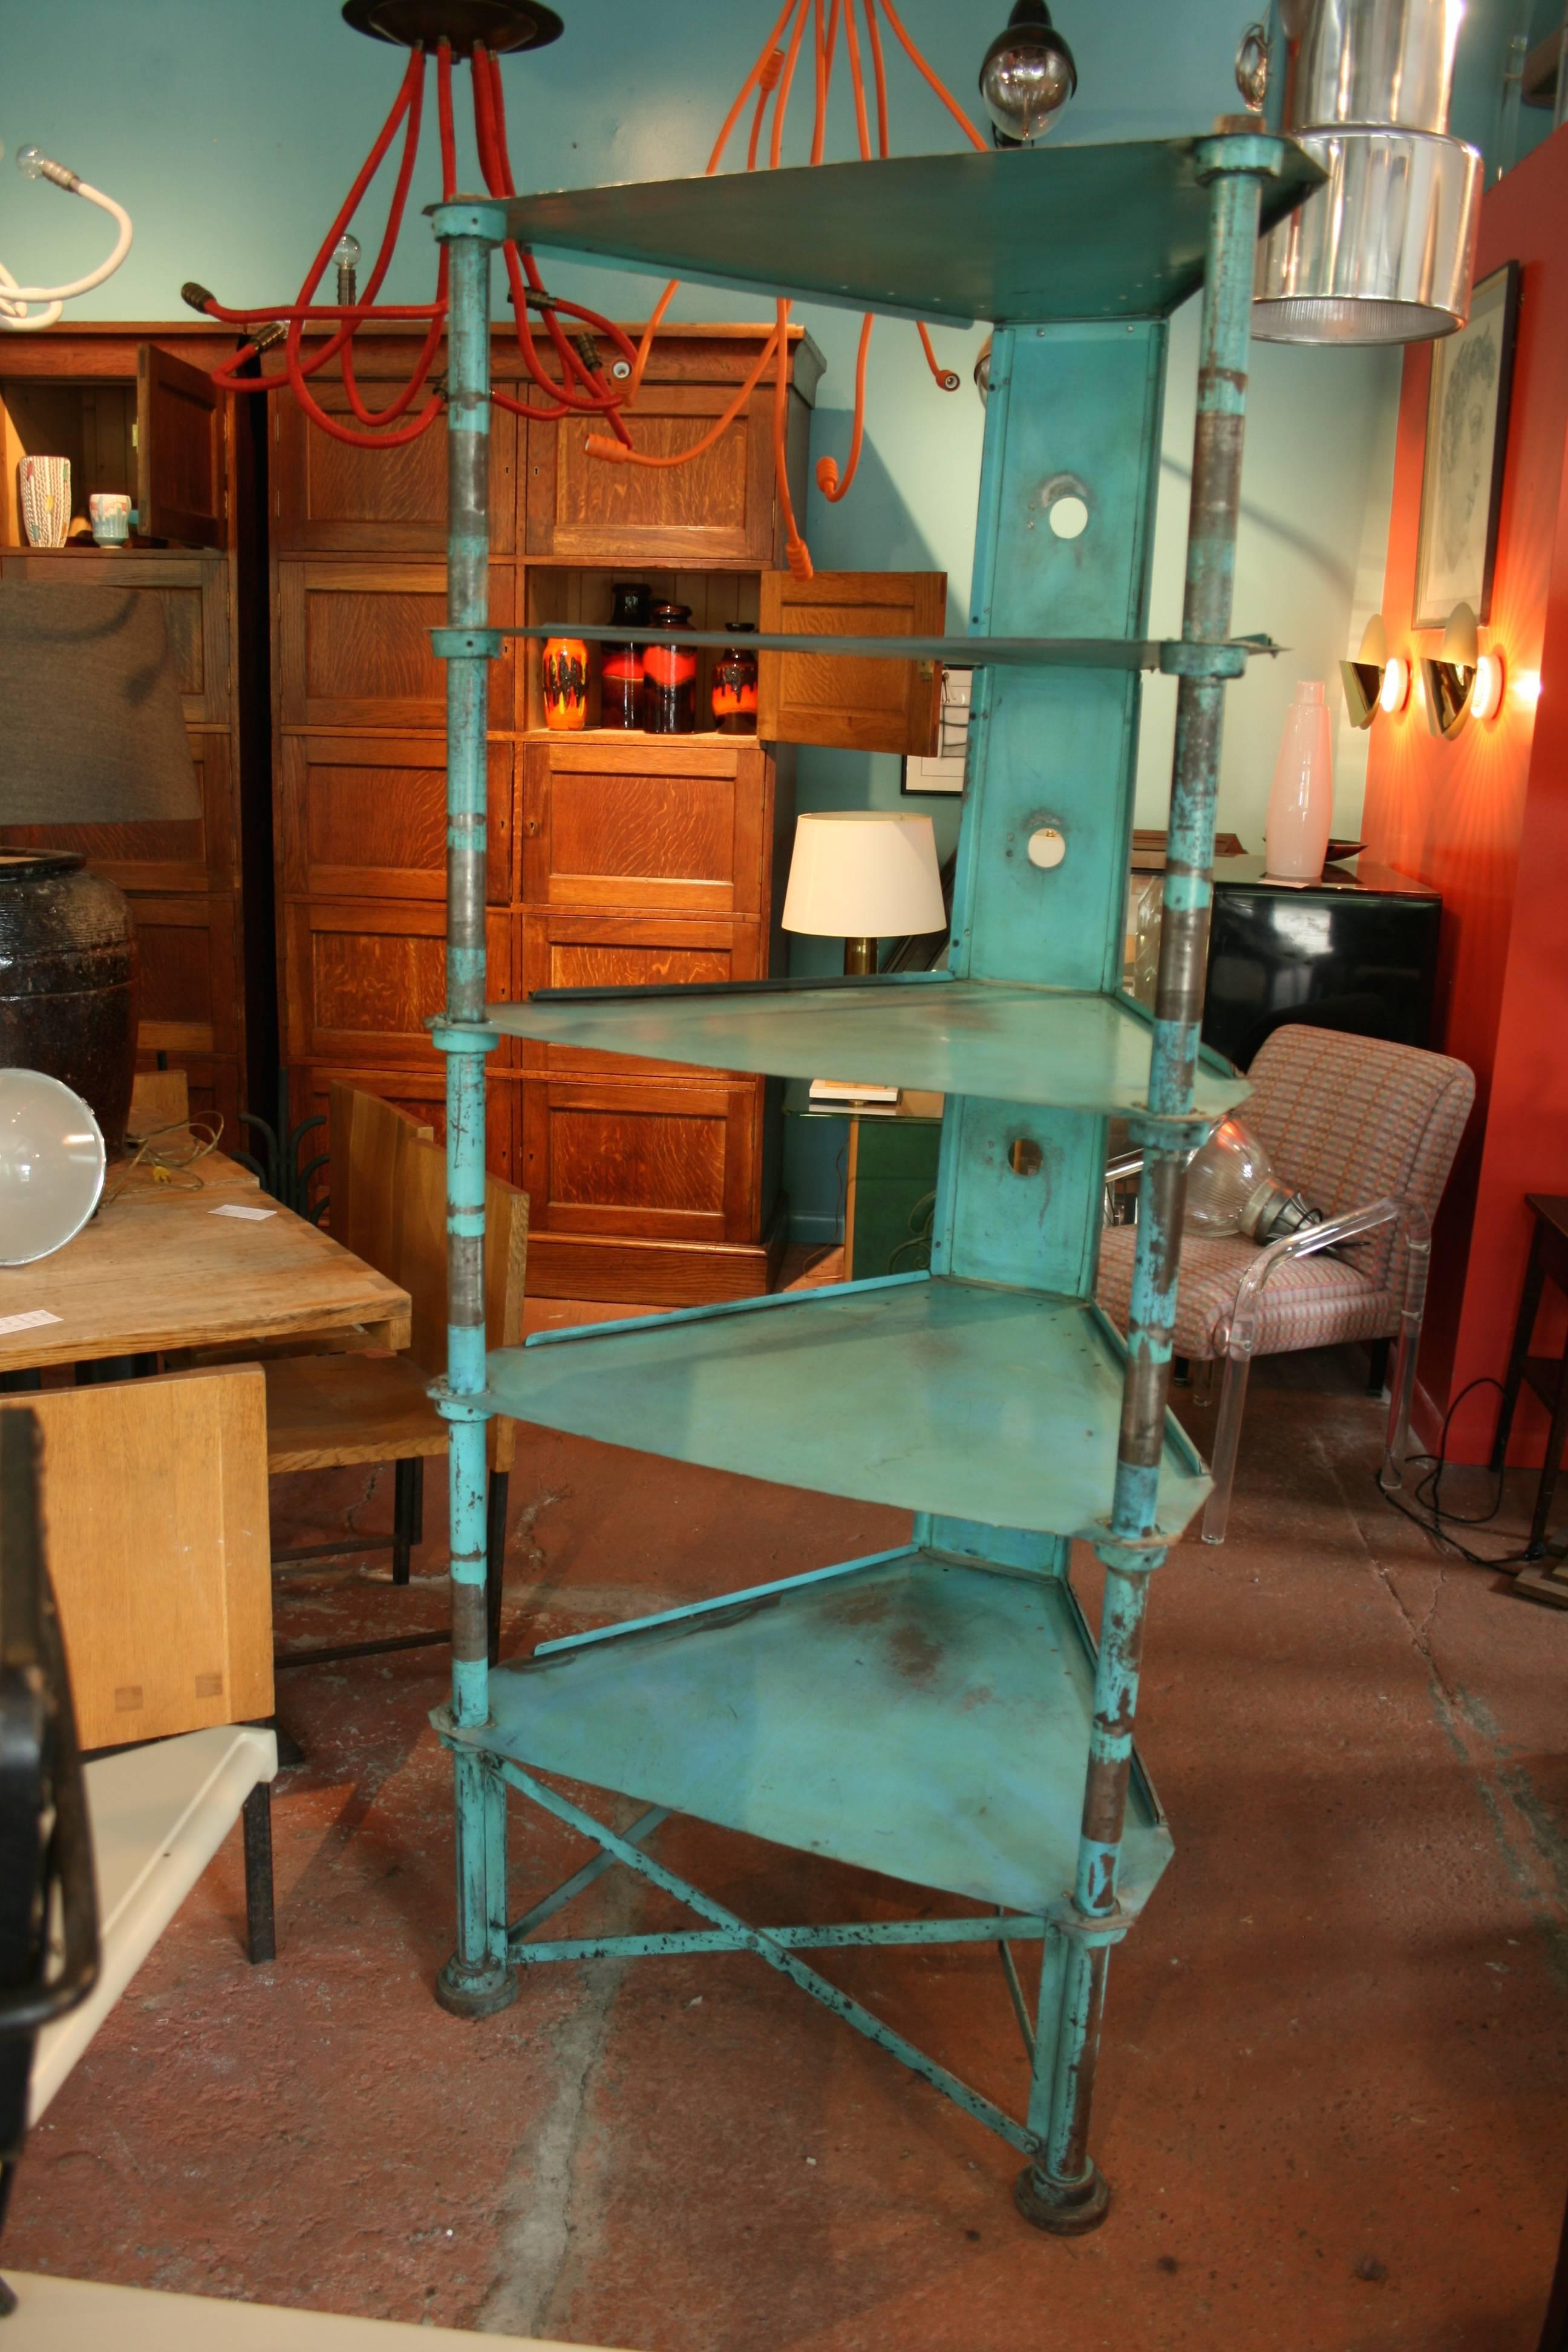 French metal etagere in original turquoise paint; can be corner shelving or freestanding.
Avantgarden Ltd. cultivates unexpected and exceptional lighting, furniture and design.  To view items in person please visit our showroom in Pound Ridge, New